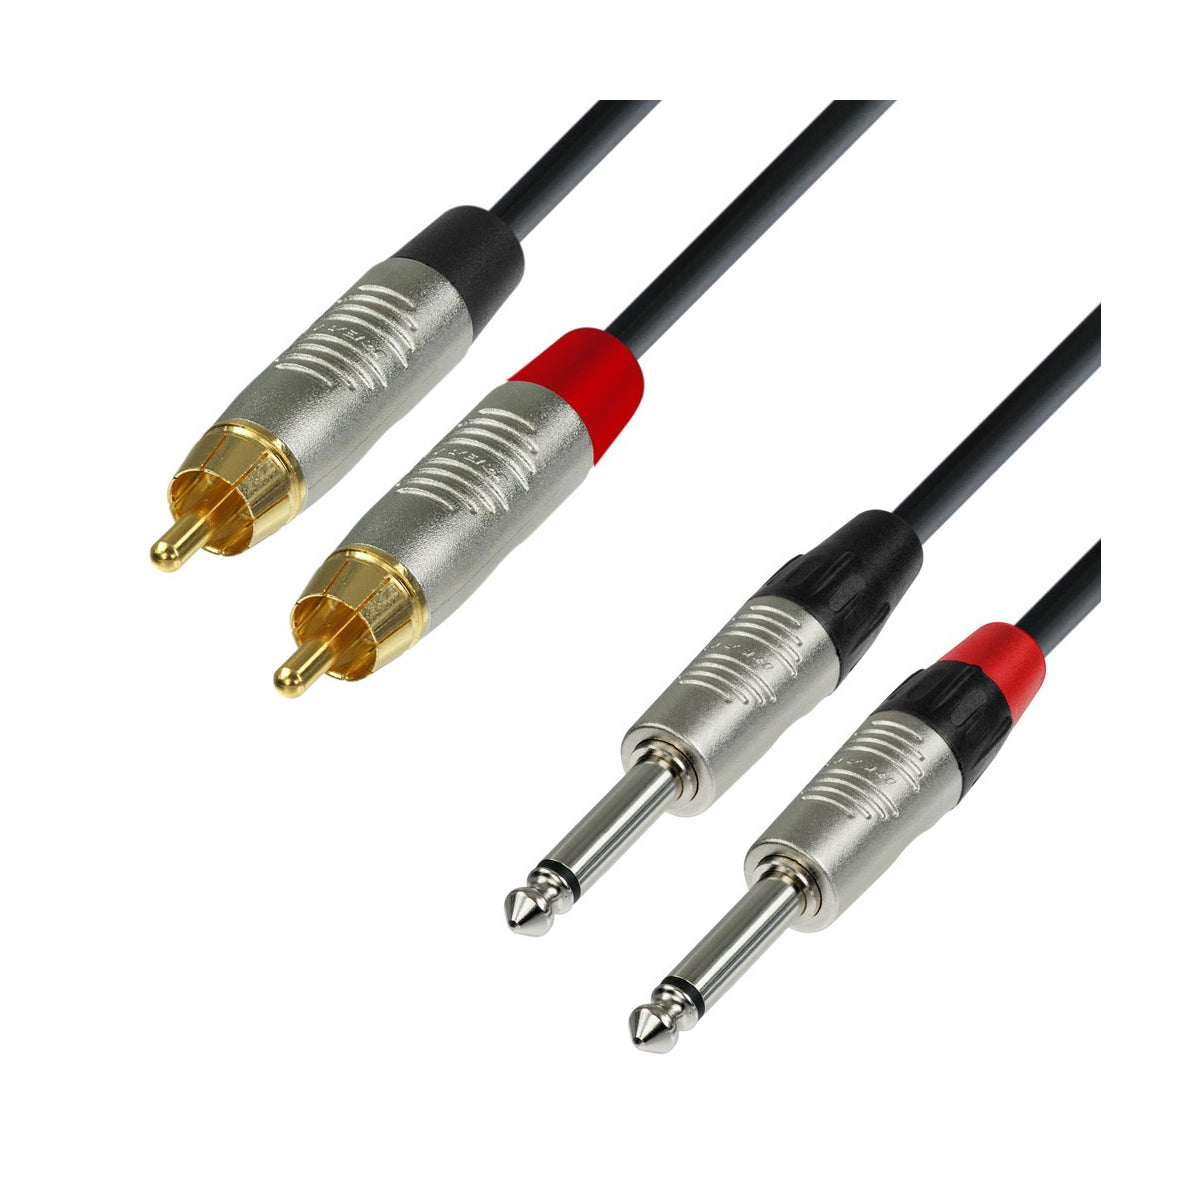 Adam Hall Cables K4 TPC 0300 - Audio Cable REAN 2 x RCA male to 2 x 6.3mm Jack mono 3m